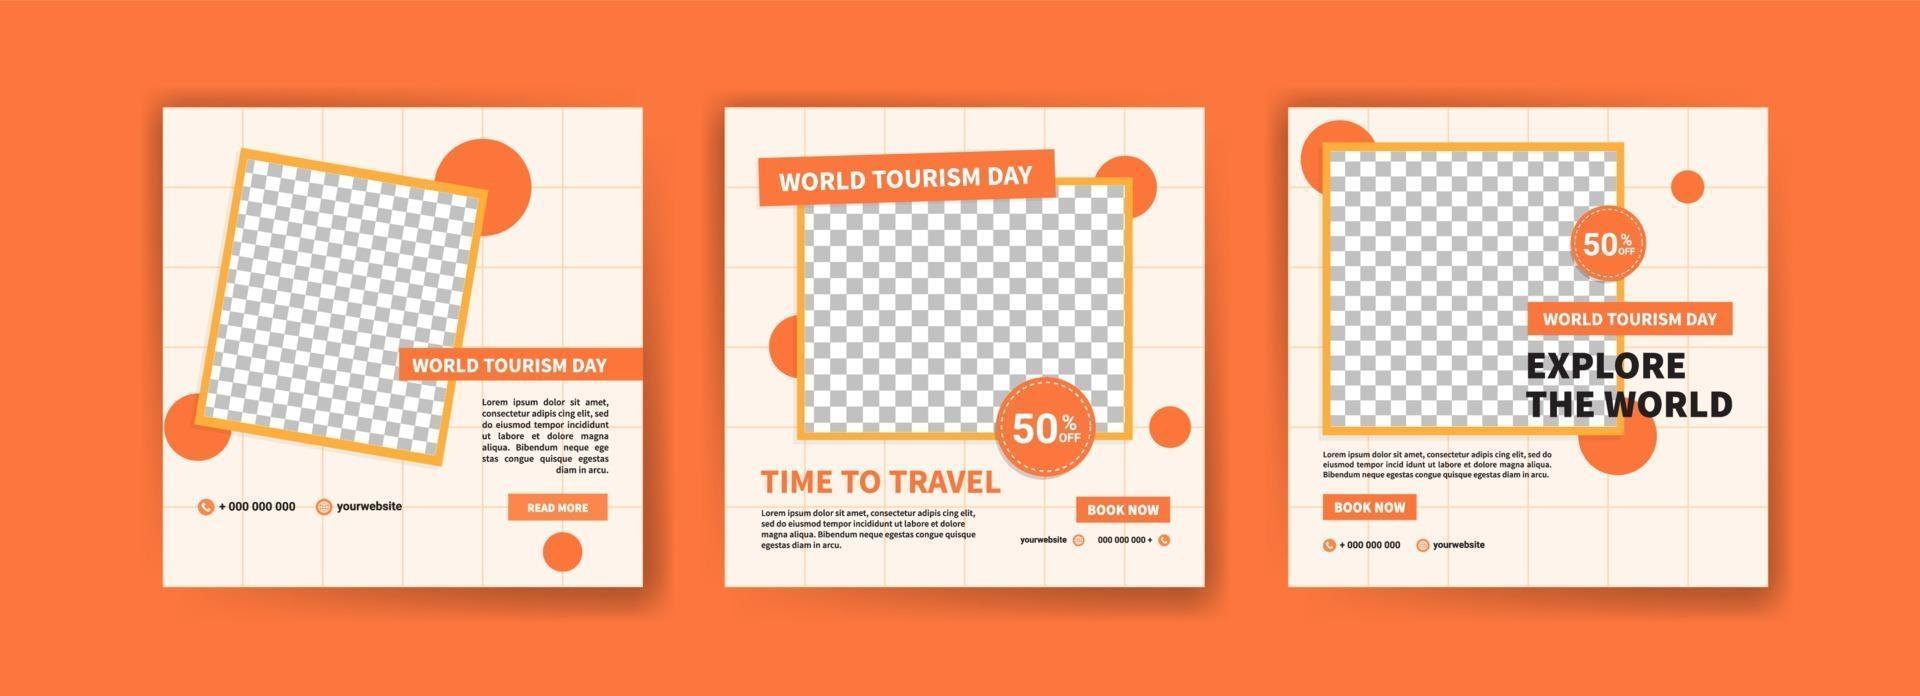 Social media post template for world tourism day promotion. vector